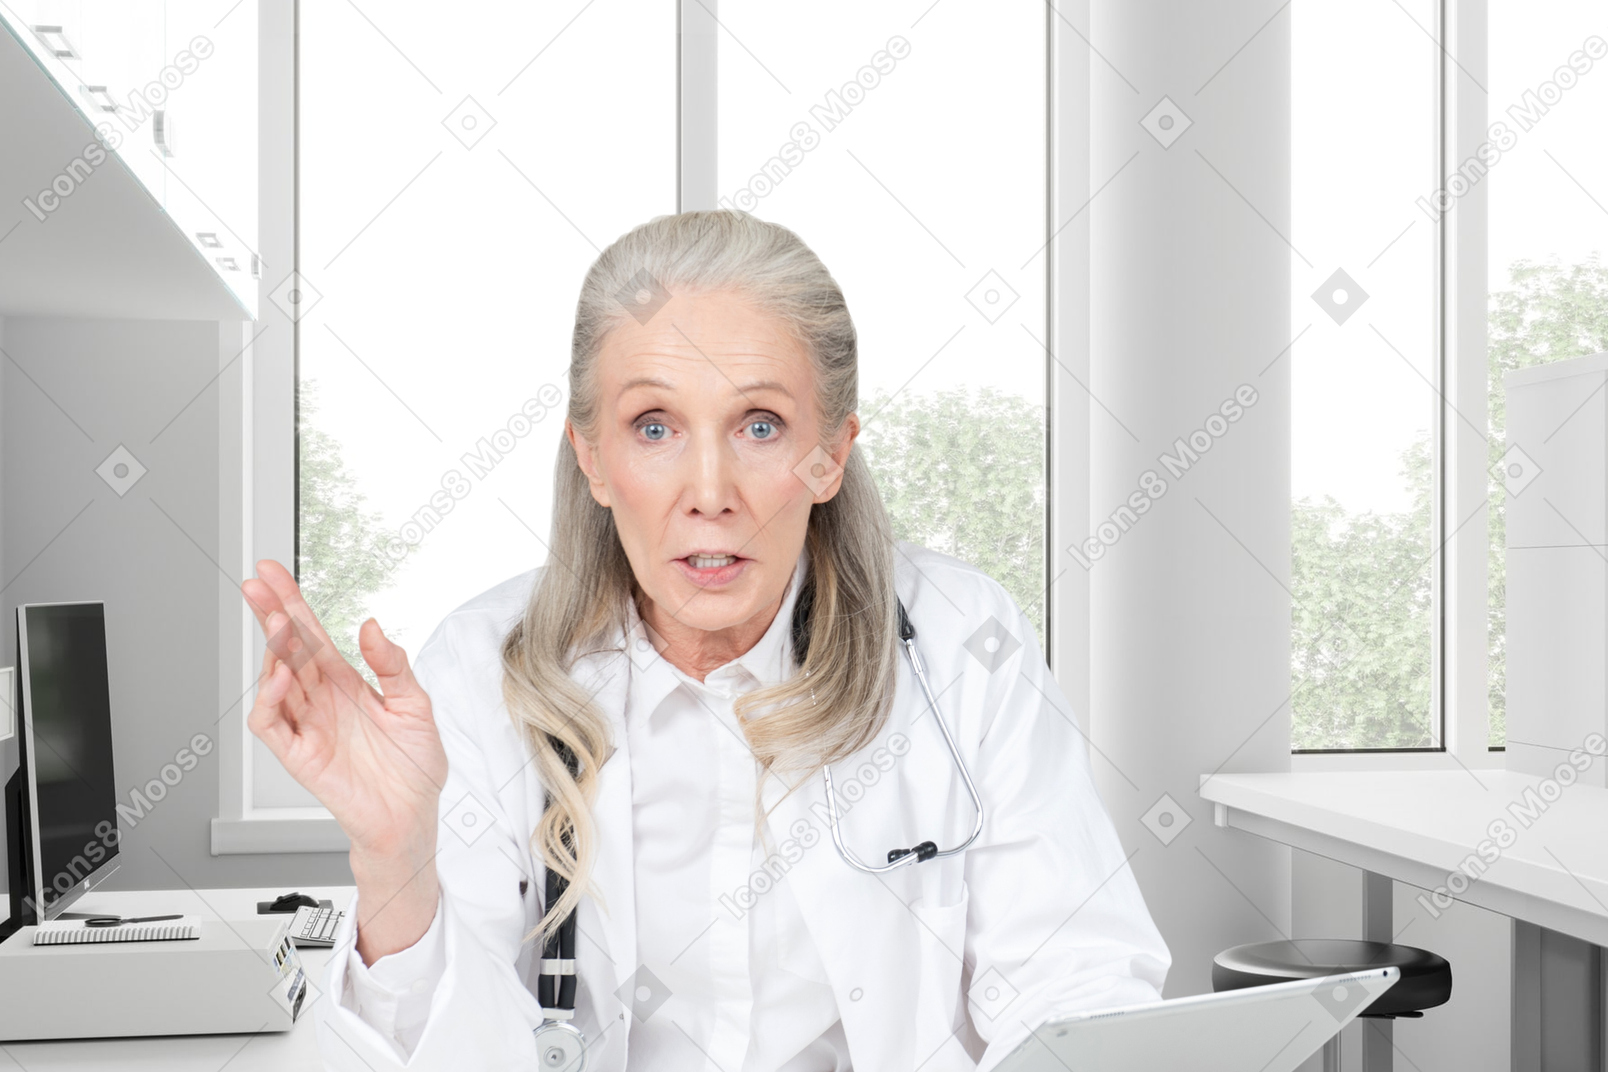 A woman in a white lab coat sitting at a desk with a laptop